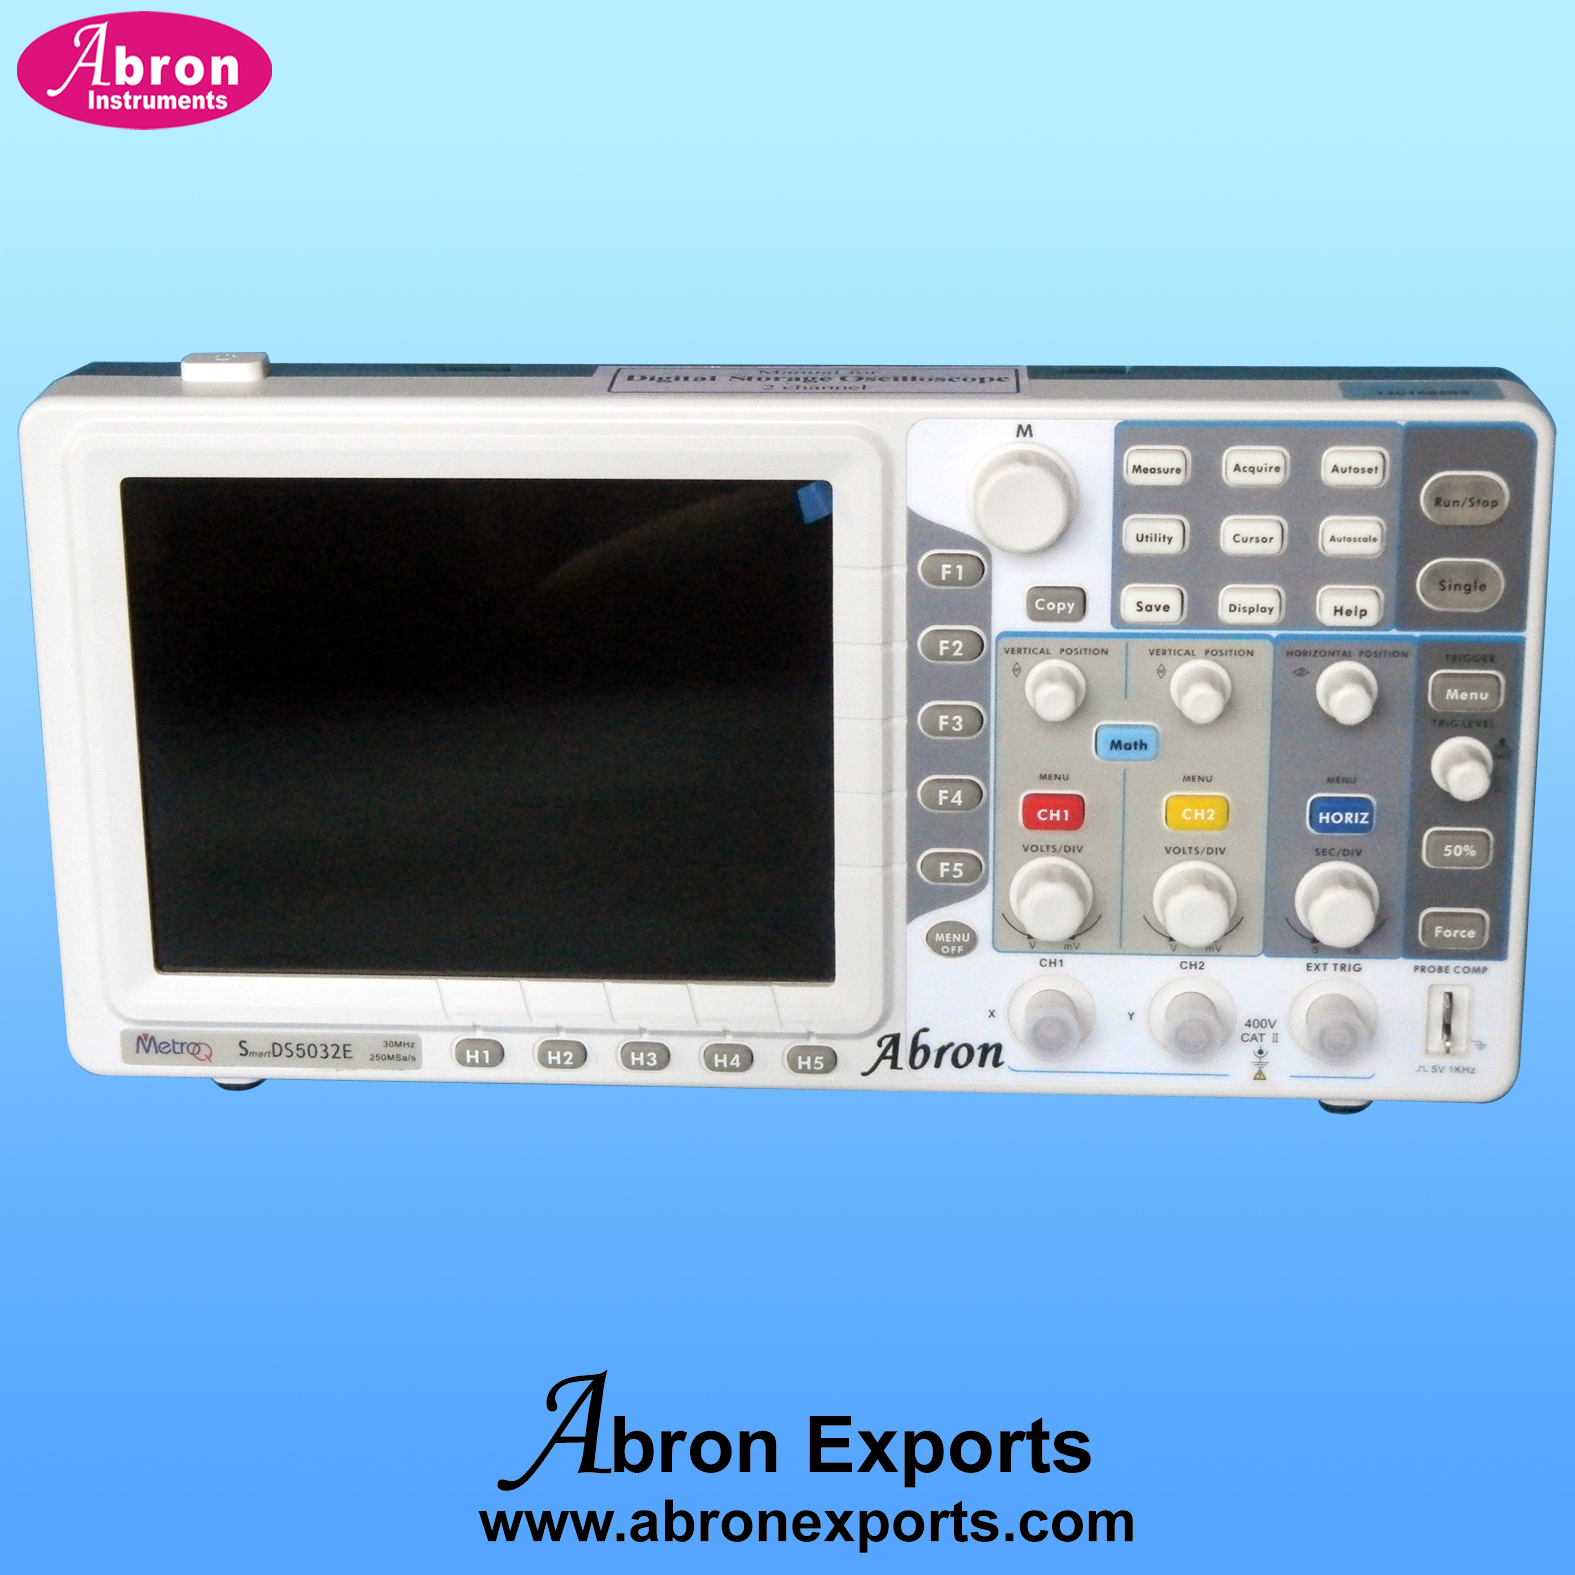 CRO Oscilloscope 30 MHz Dual trace Horizontal Size 8x10cm 2 channel screen with power supply AE-1343A30     